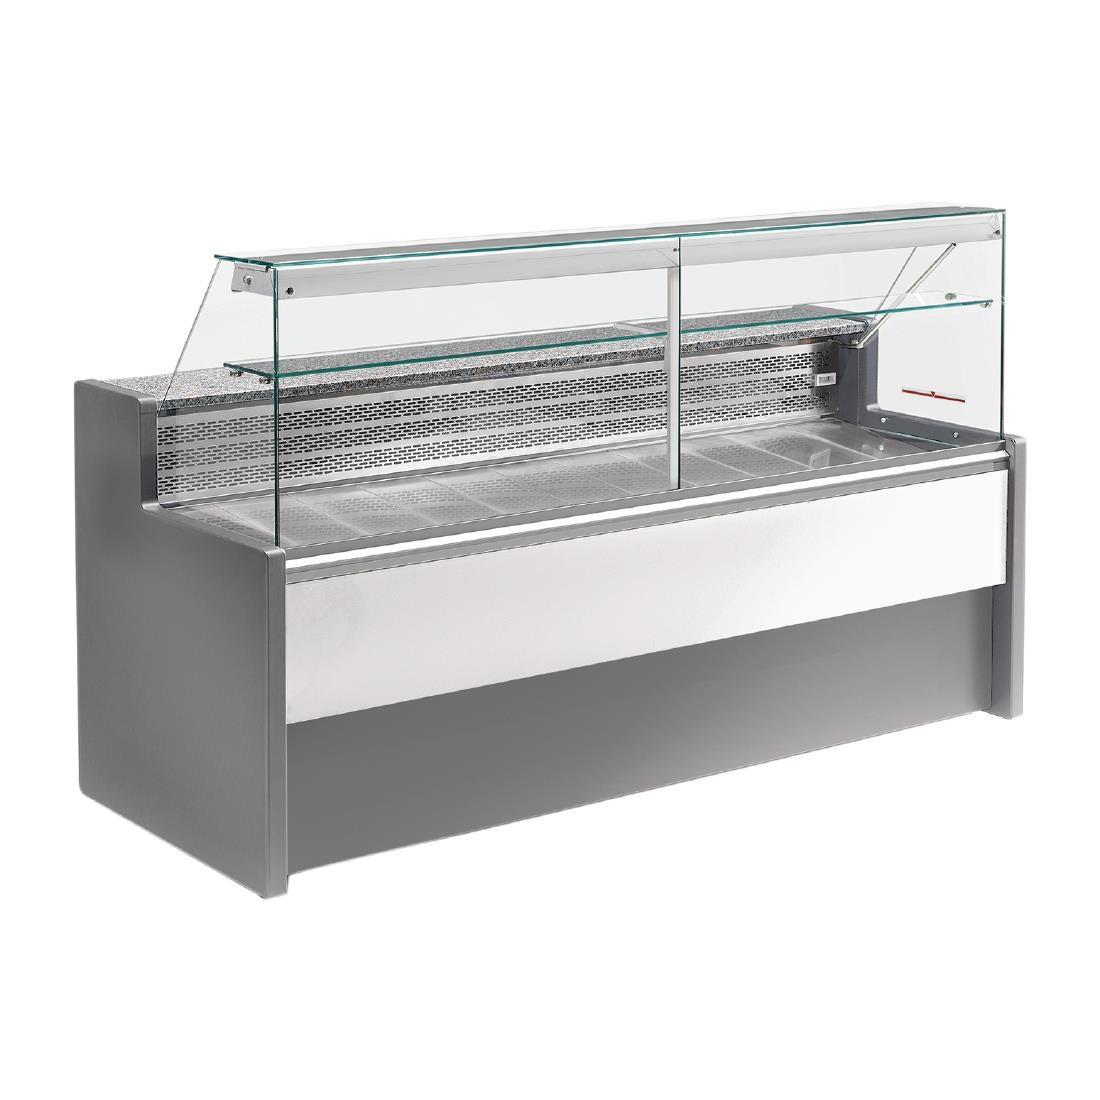 FP924-250 Zoin Tibet Serve Over Counter Grey 2500mm JD Catering Equipment Solutions Ltd